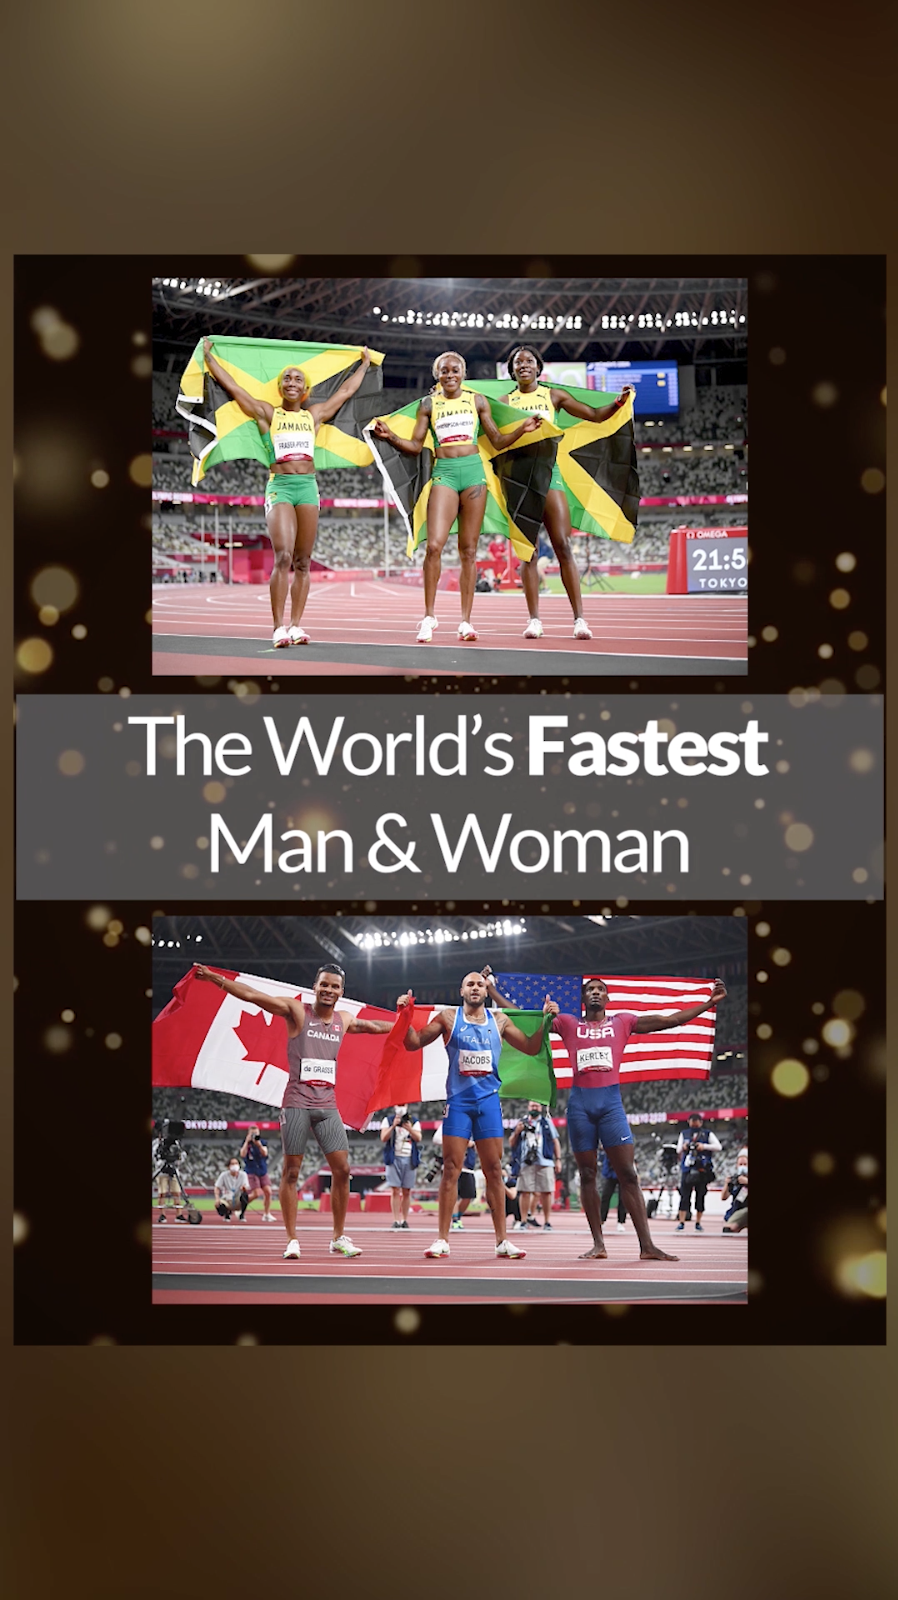 social media production - The World's Fastest Man & Woman